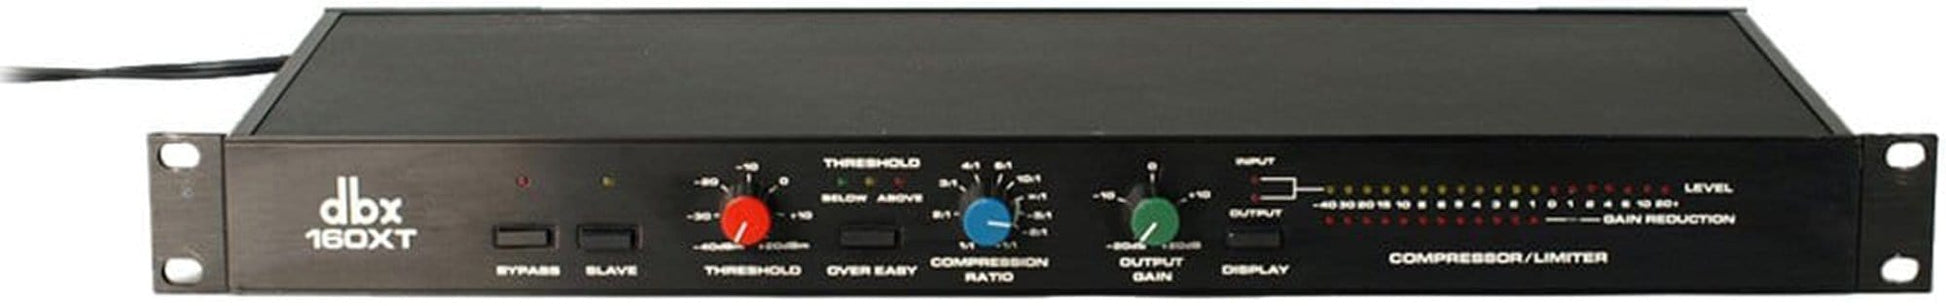 DBX 160XT Single Channel Compressor Limiter - ProSound and Stage Lighting